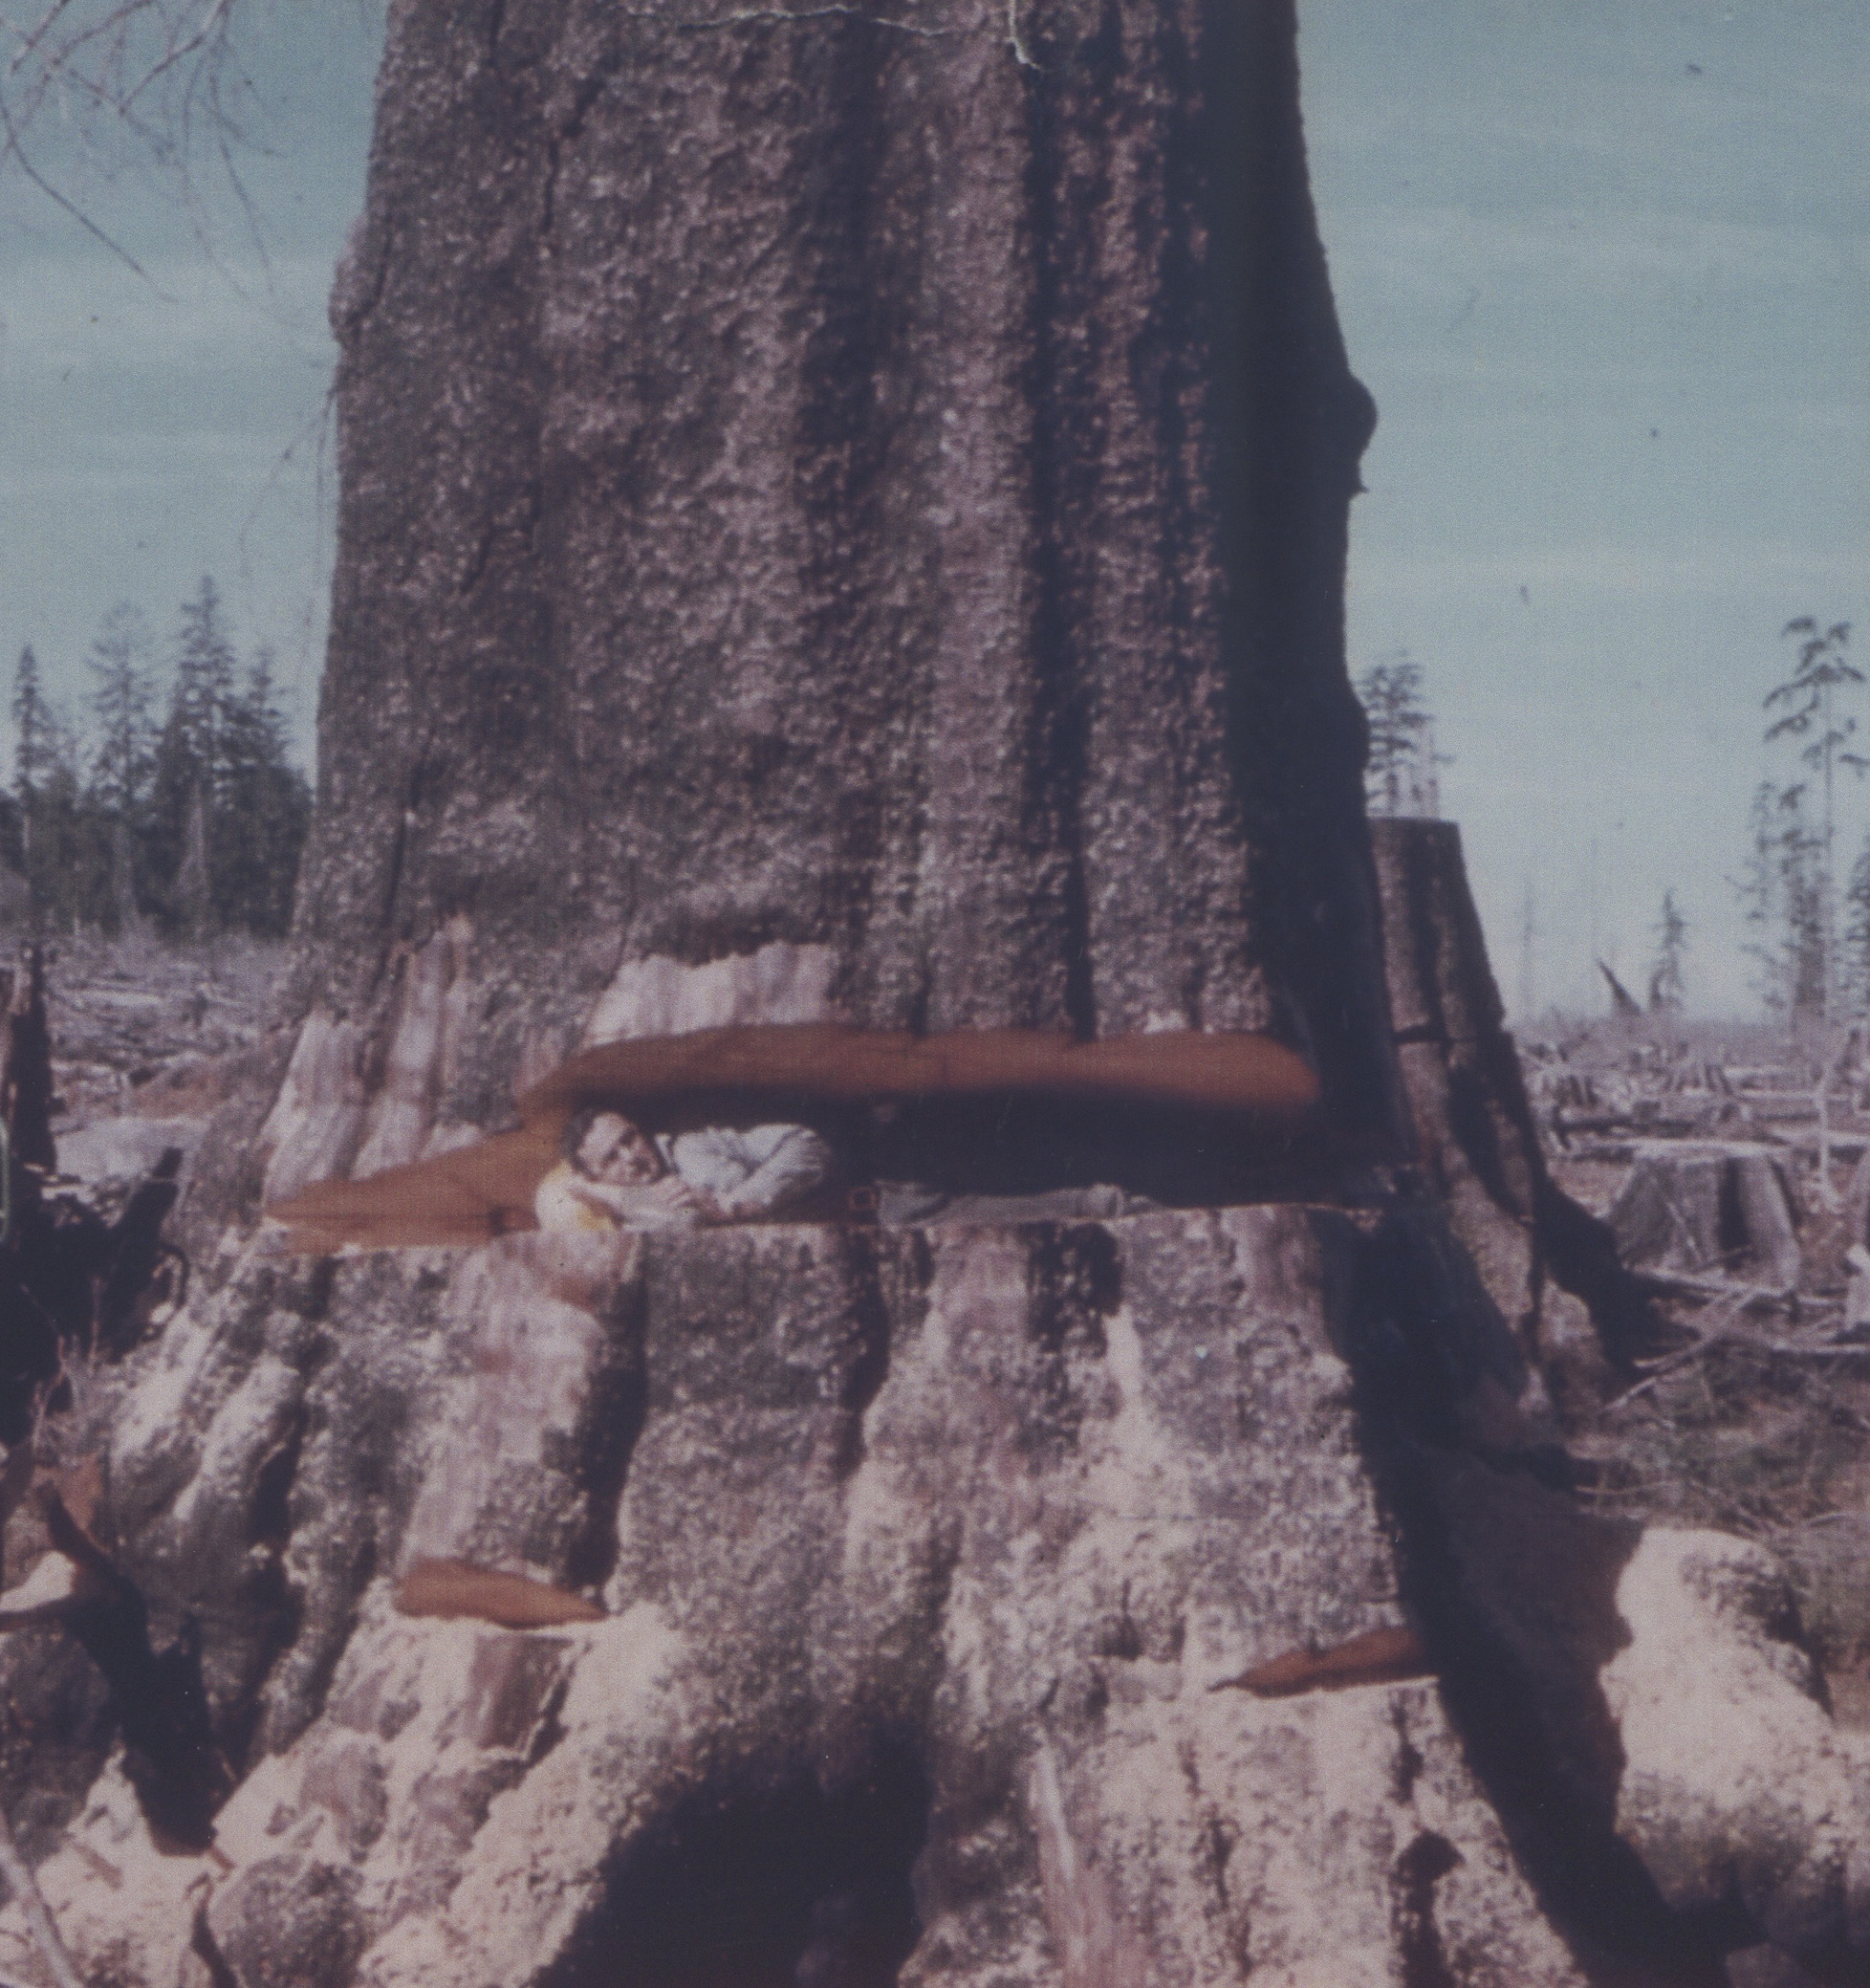 Jack Merrick is this year's Pioneer Logger Award honoree. Here he is lying inside the face-cut of a tree near the Hoh River in 1960. Merrick family (Click on photo to enlarge)